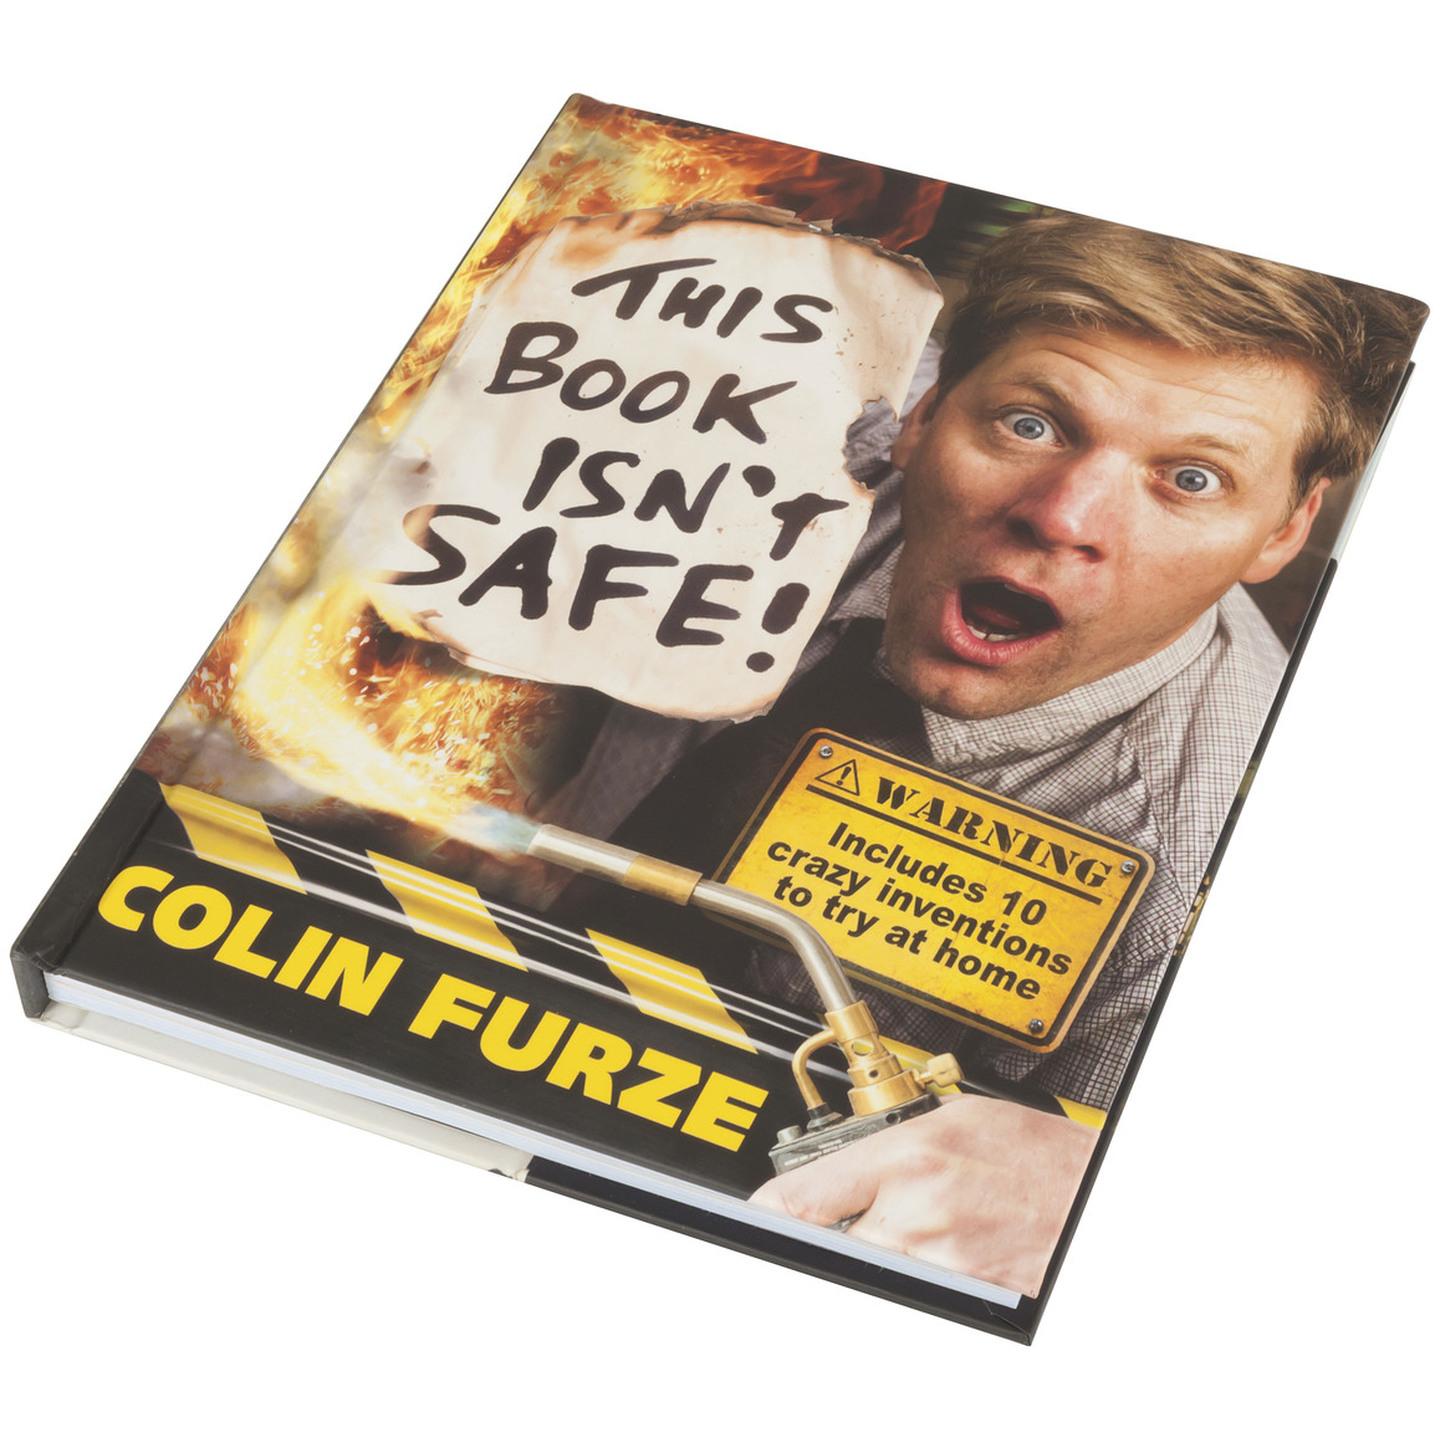 This Book Isnt Safe - Colin Furze